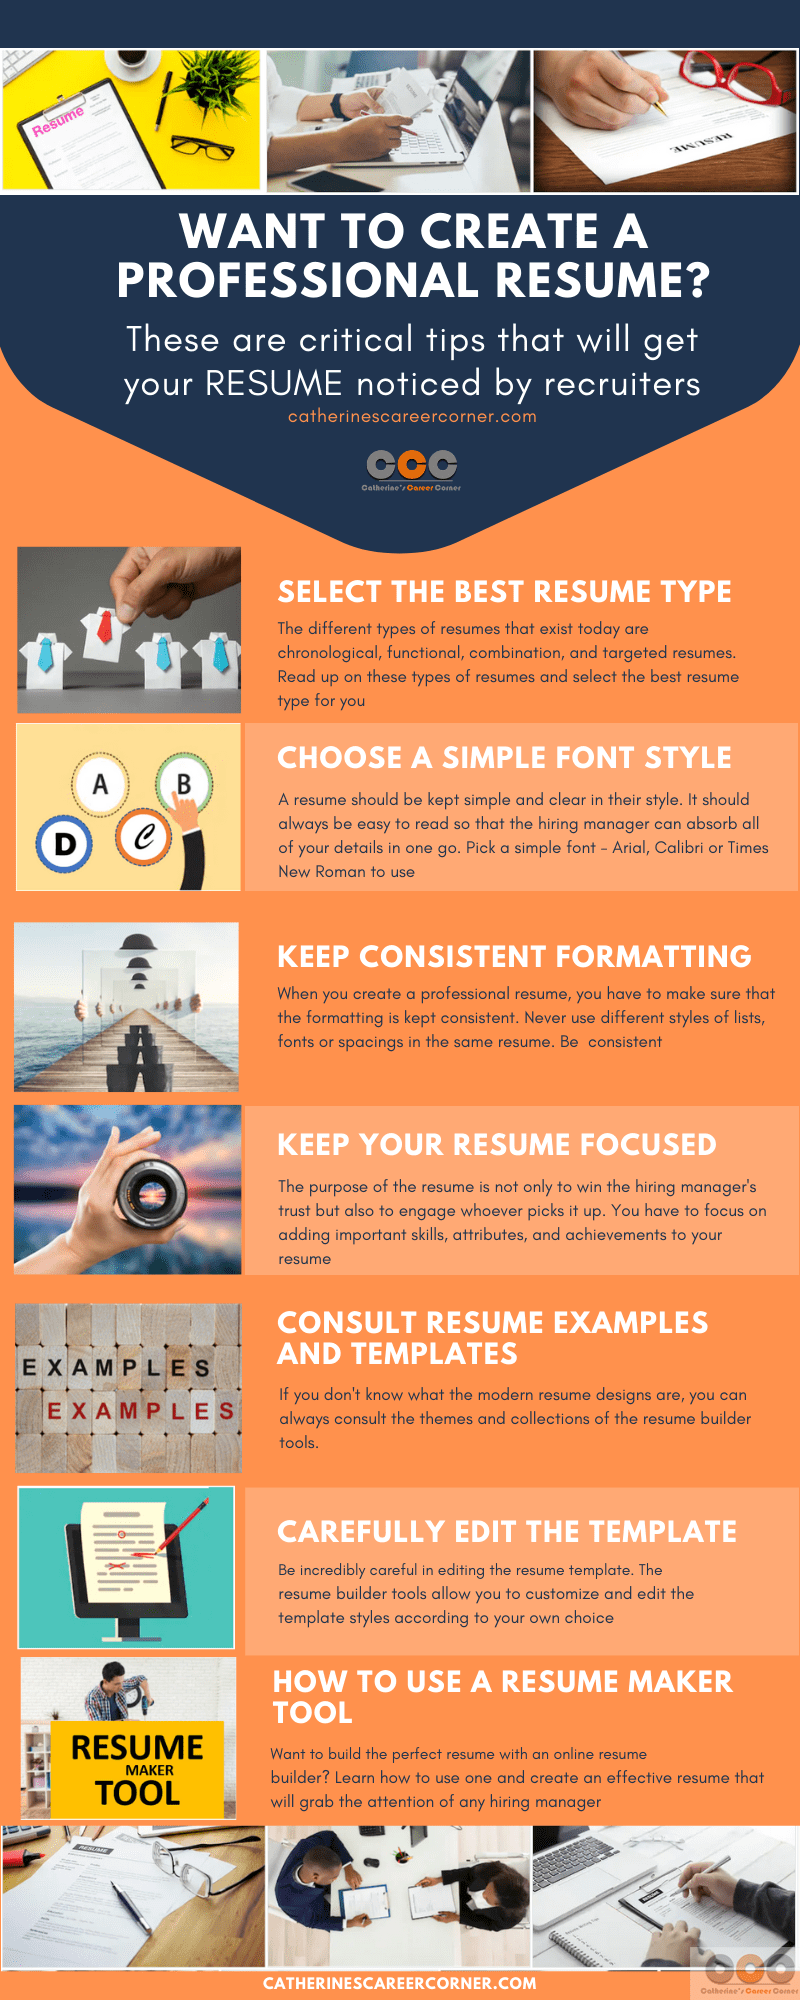 Infographic: How to create a professional resume